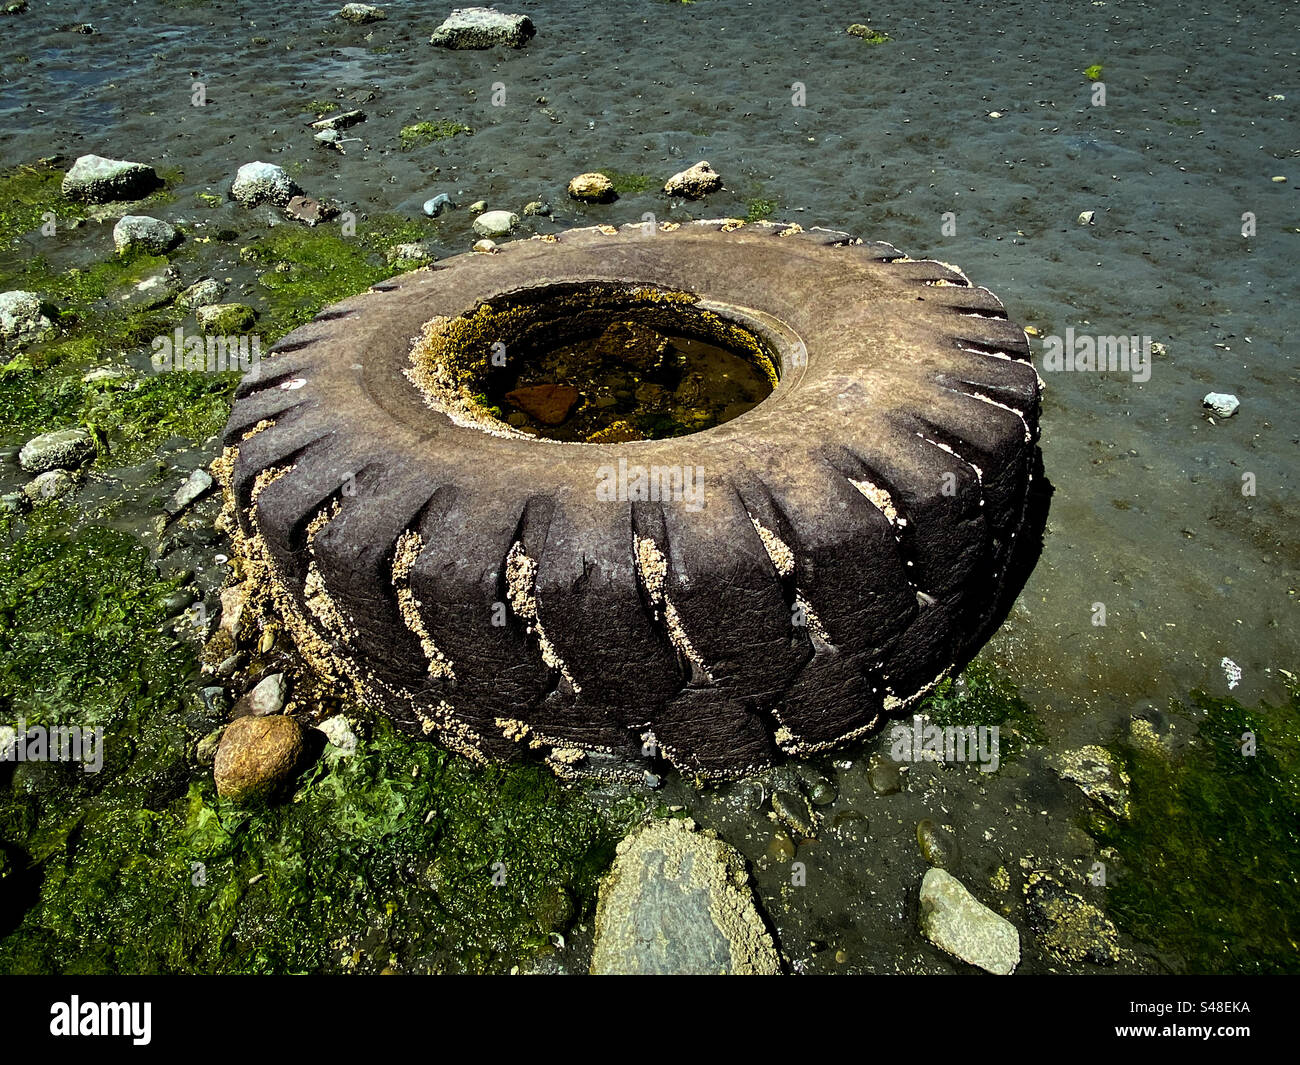 Old discarded tire washed up and imbedded in the beach with seaweed Stock Photo